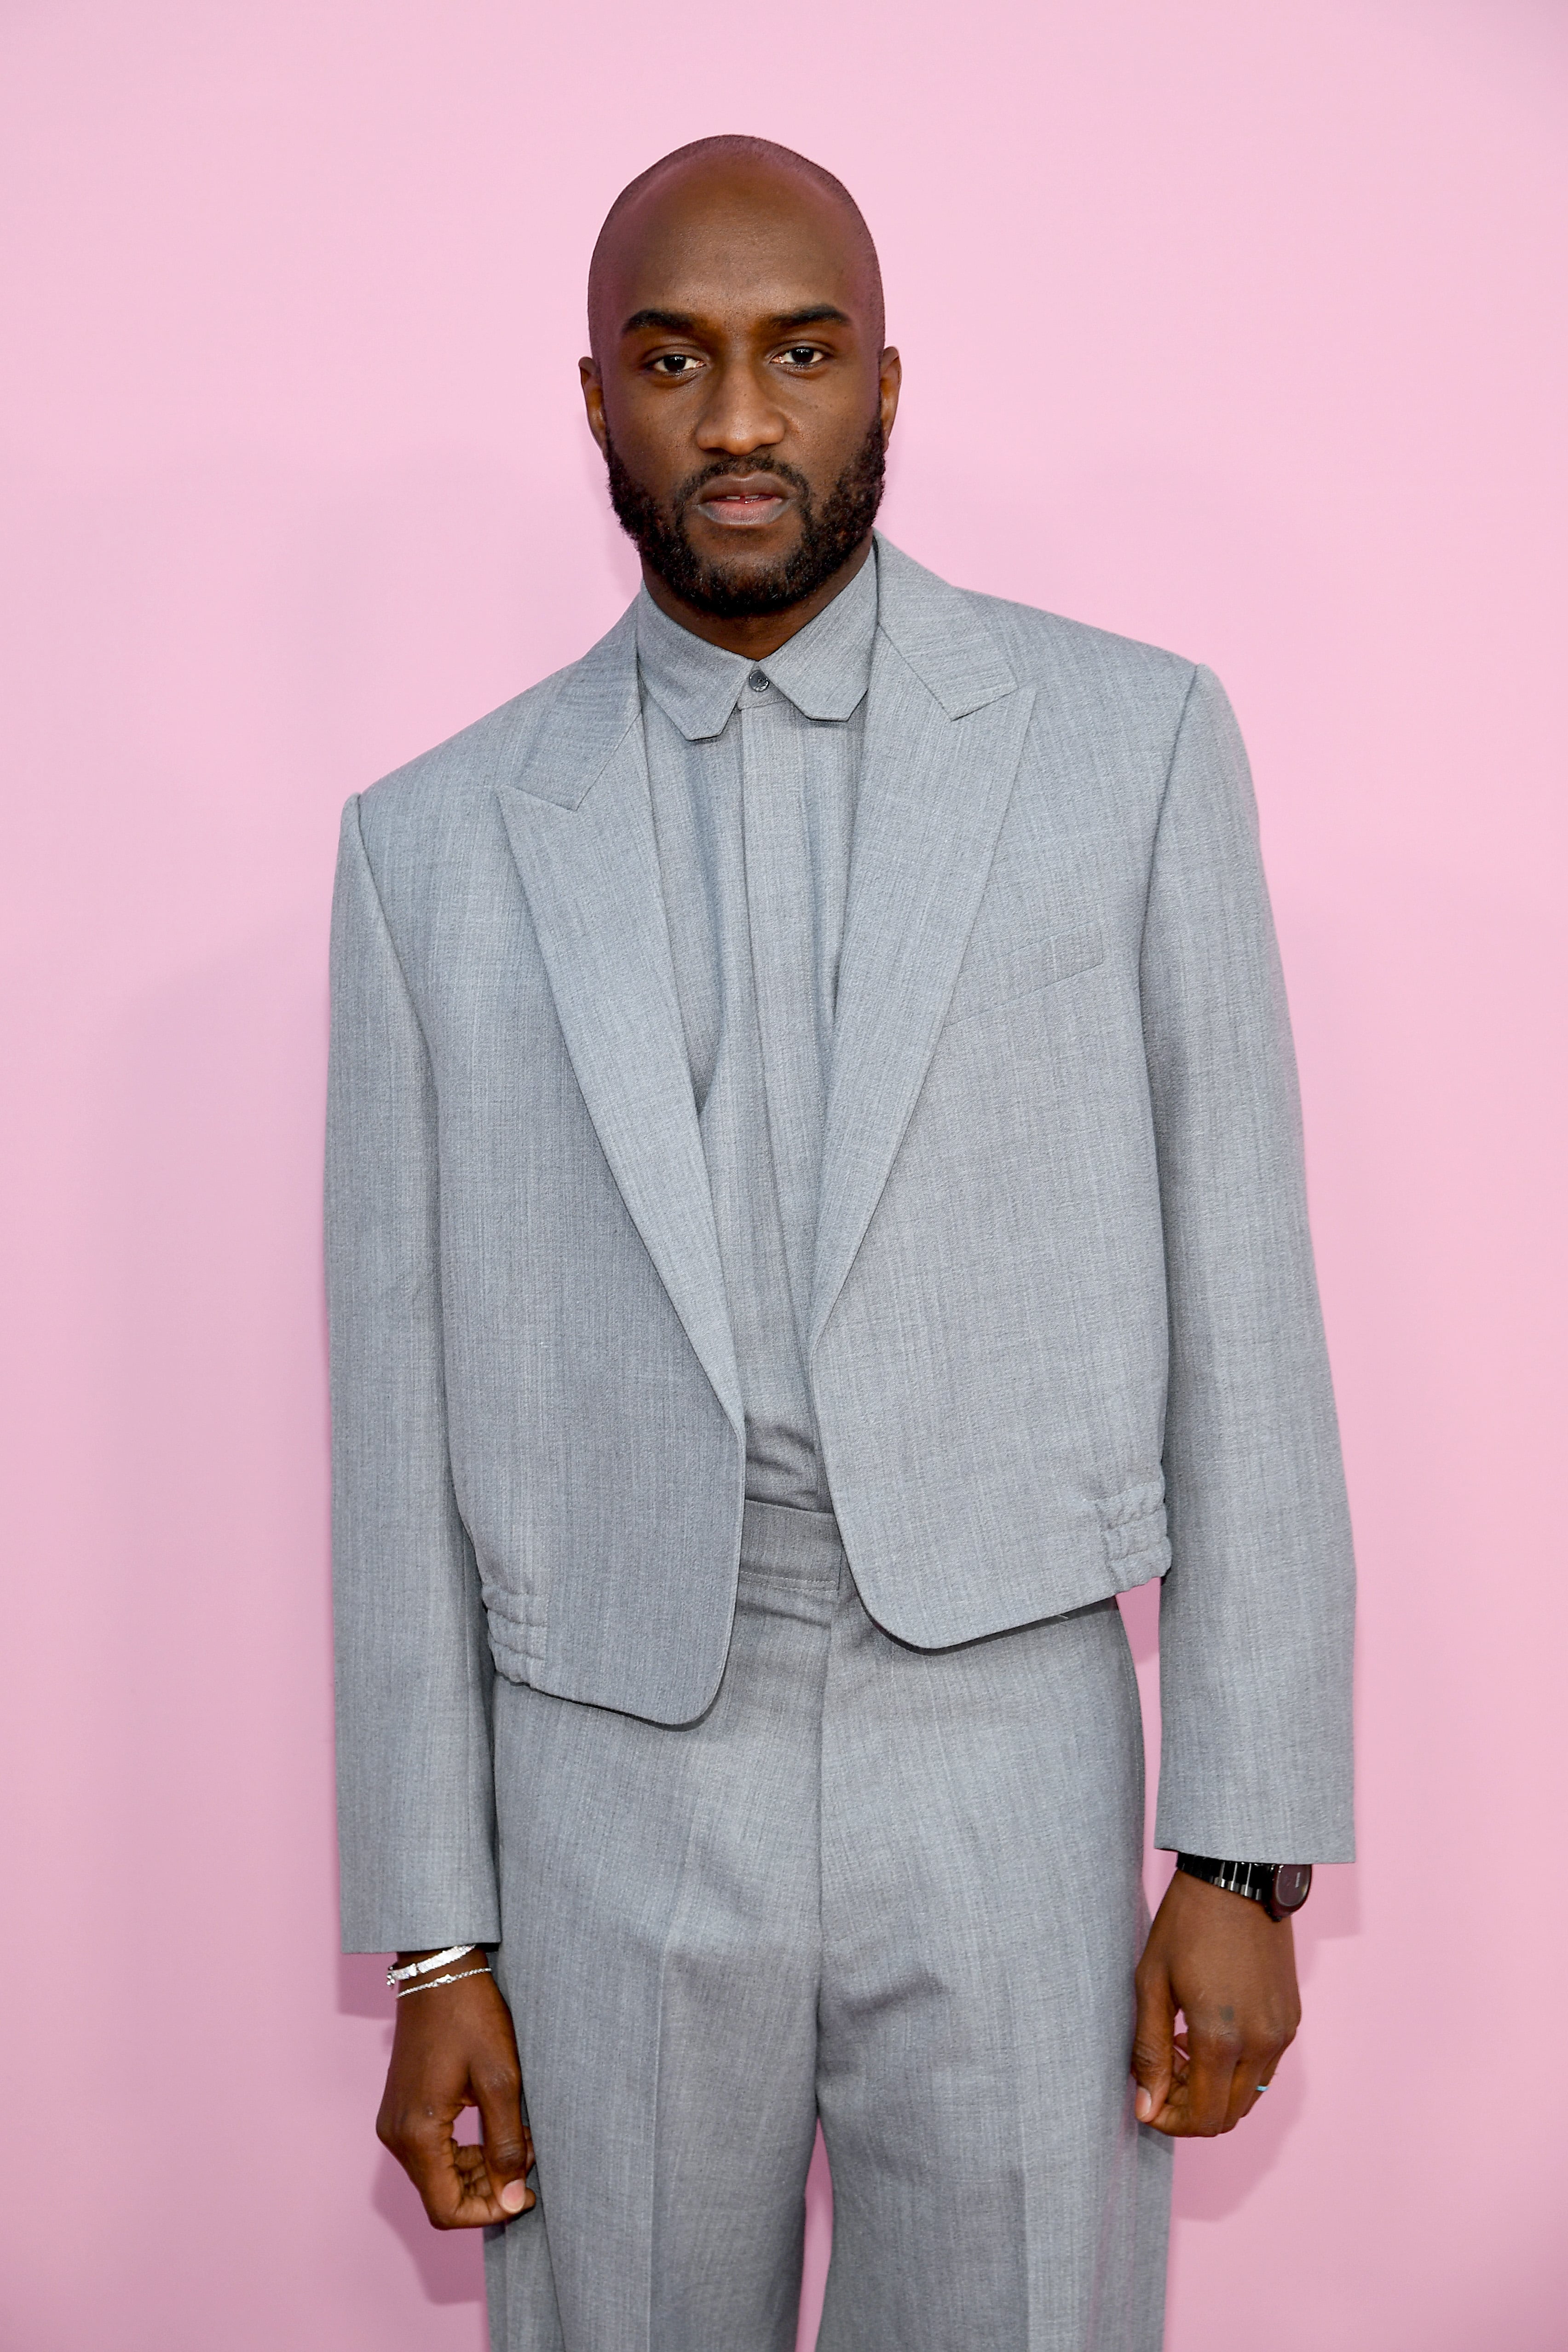 Five reasons you need to see Virgil Abloh's Coming of Age